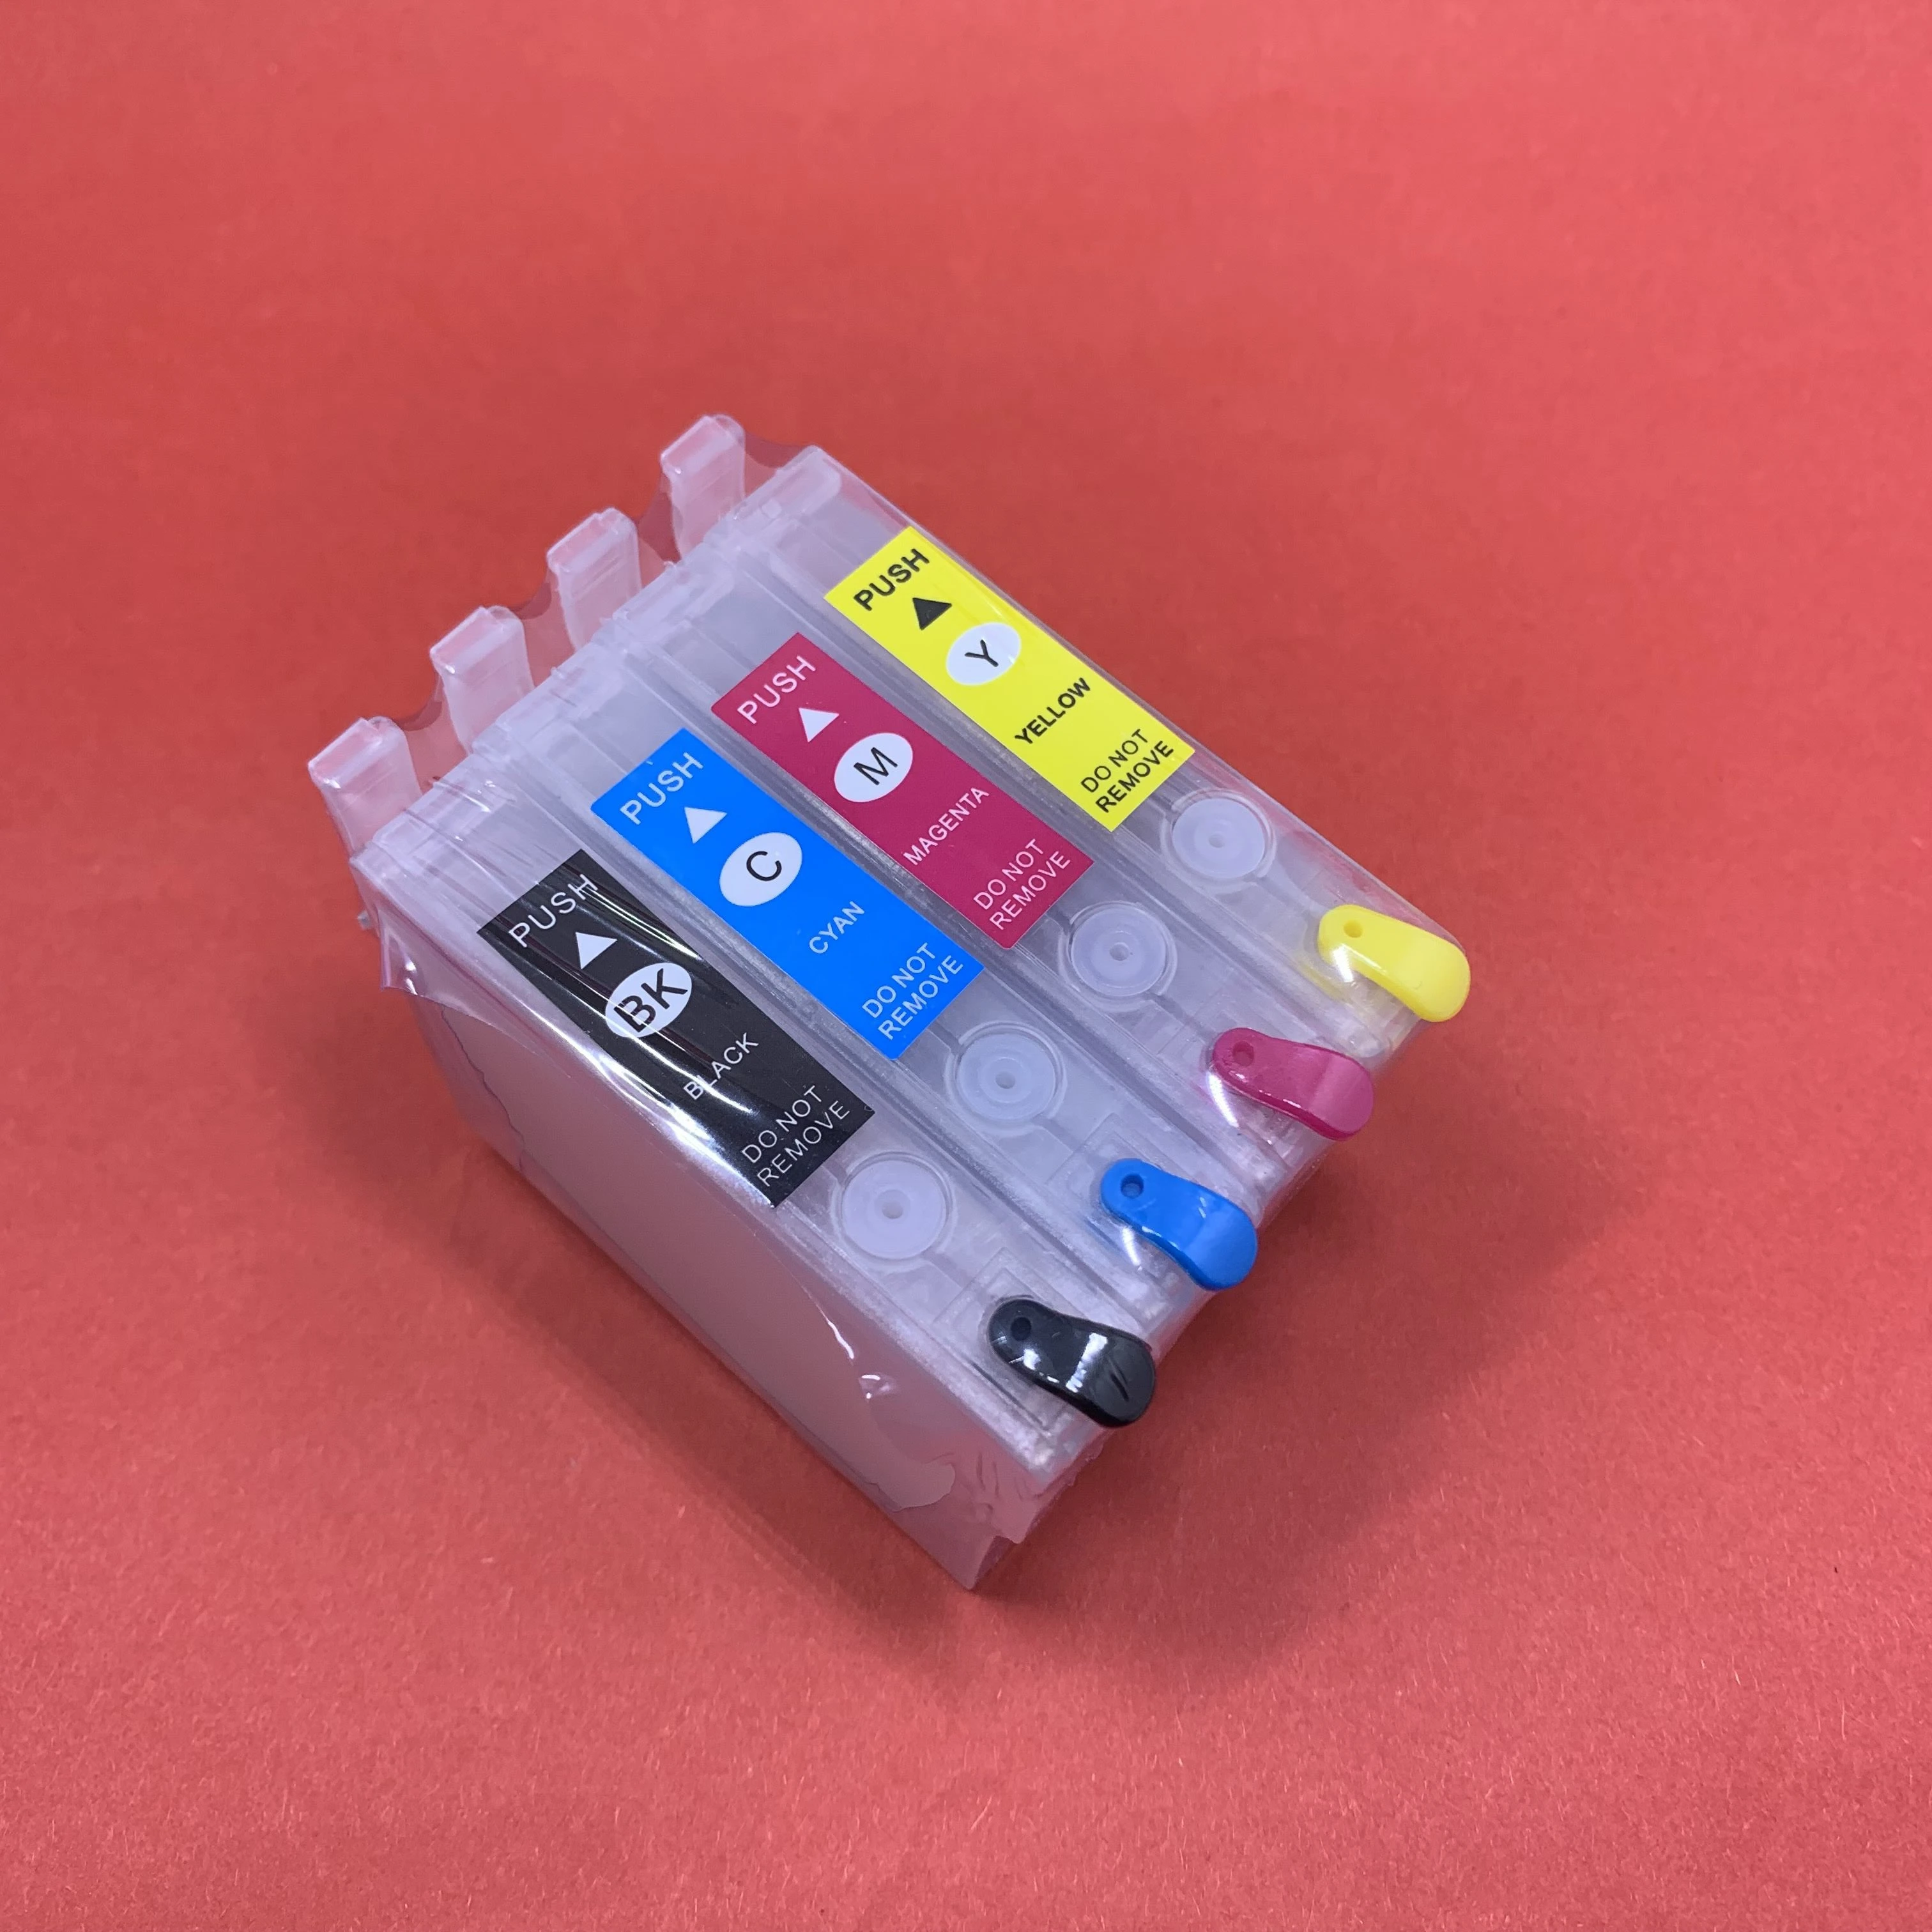 71 T0711 T0712 T0713 T0714 Empty Refillable Ink Cartridge For Epson Stylus  Dx6050 Dx7400 Dx7450 Dx8400 Dx8450 Dx9400 Dx9400f - Ink Cartridges -  AliExpress